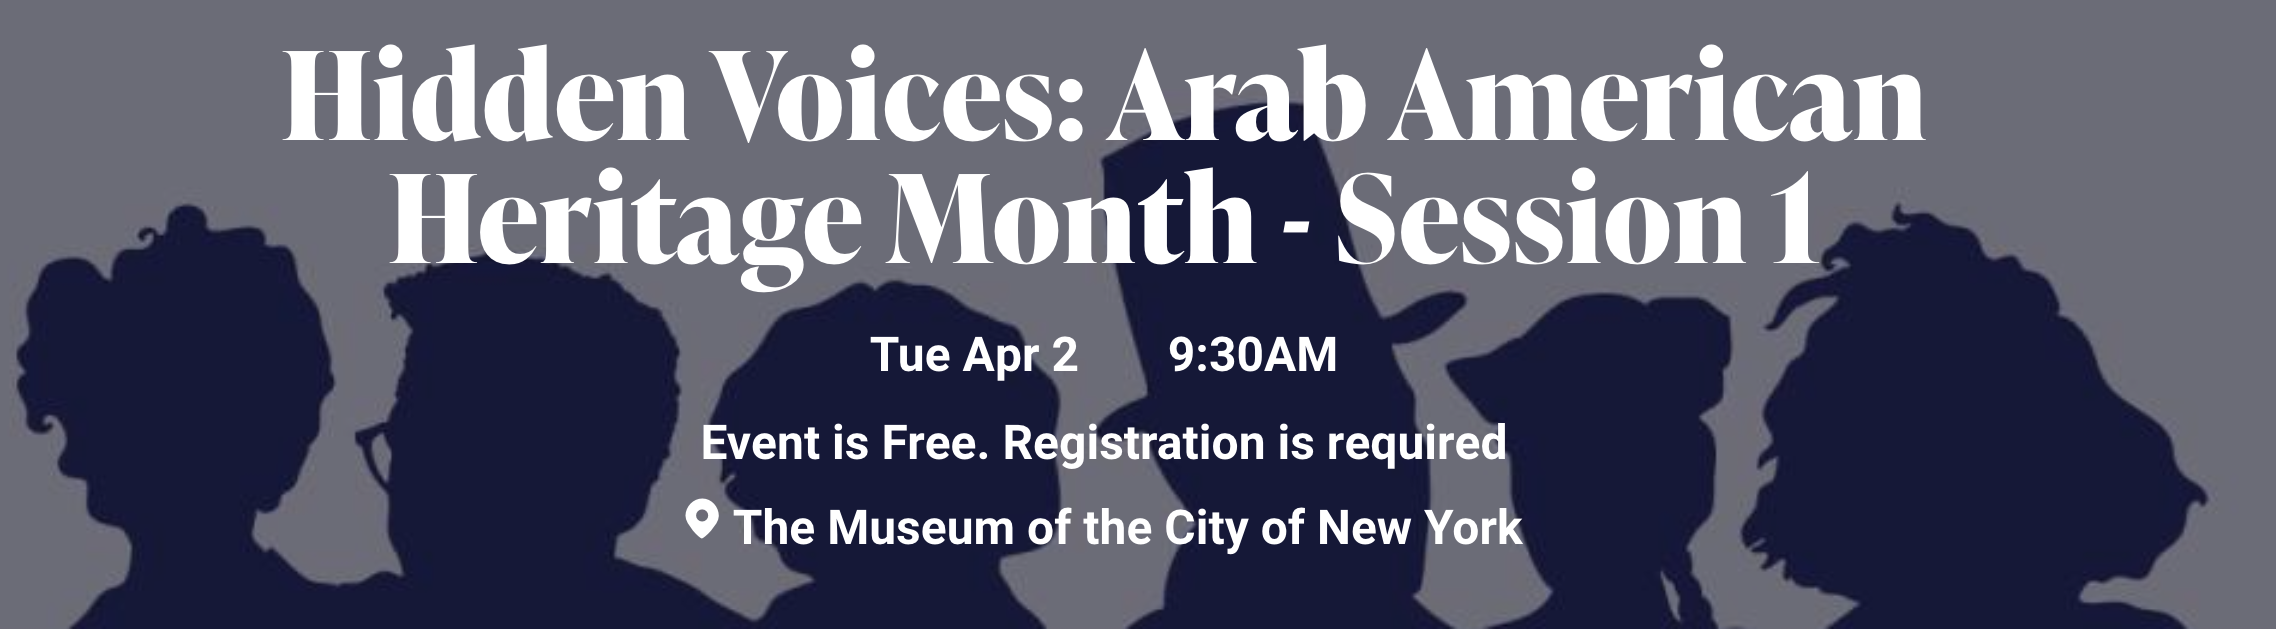 Hidden Voices: Arab American Heritage Month - Session 1